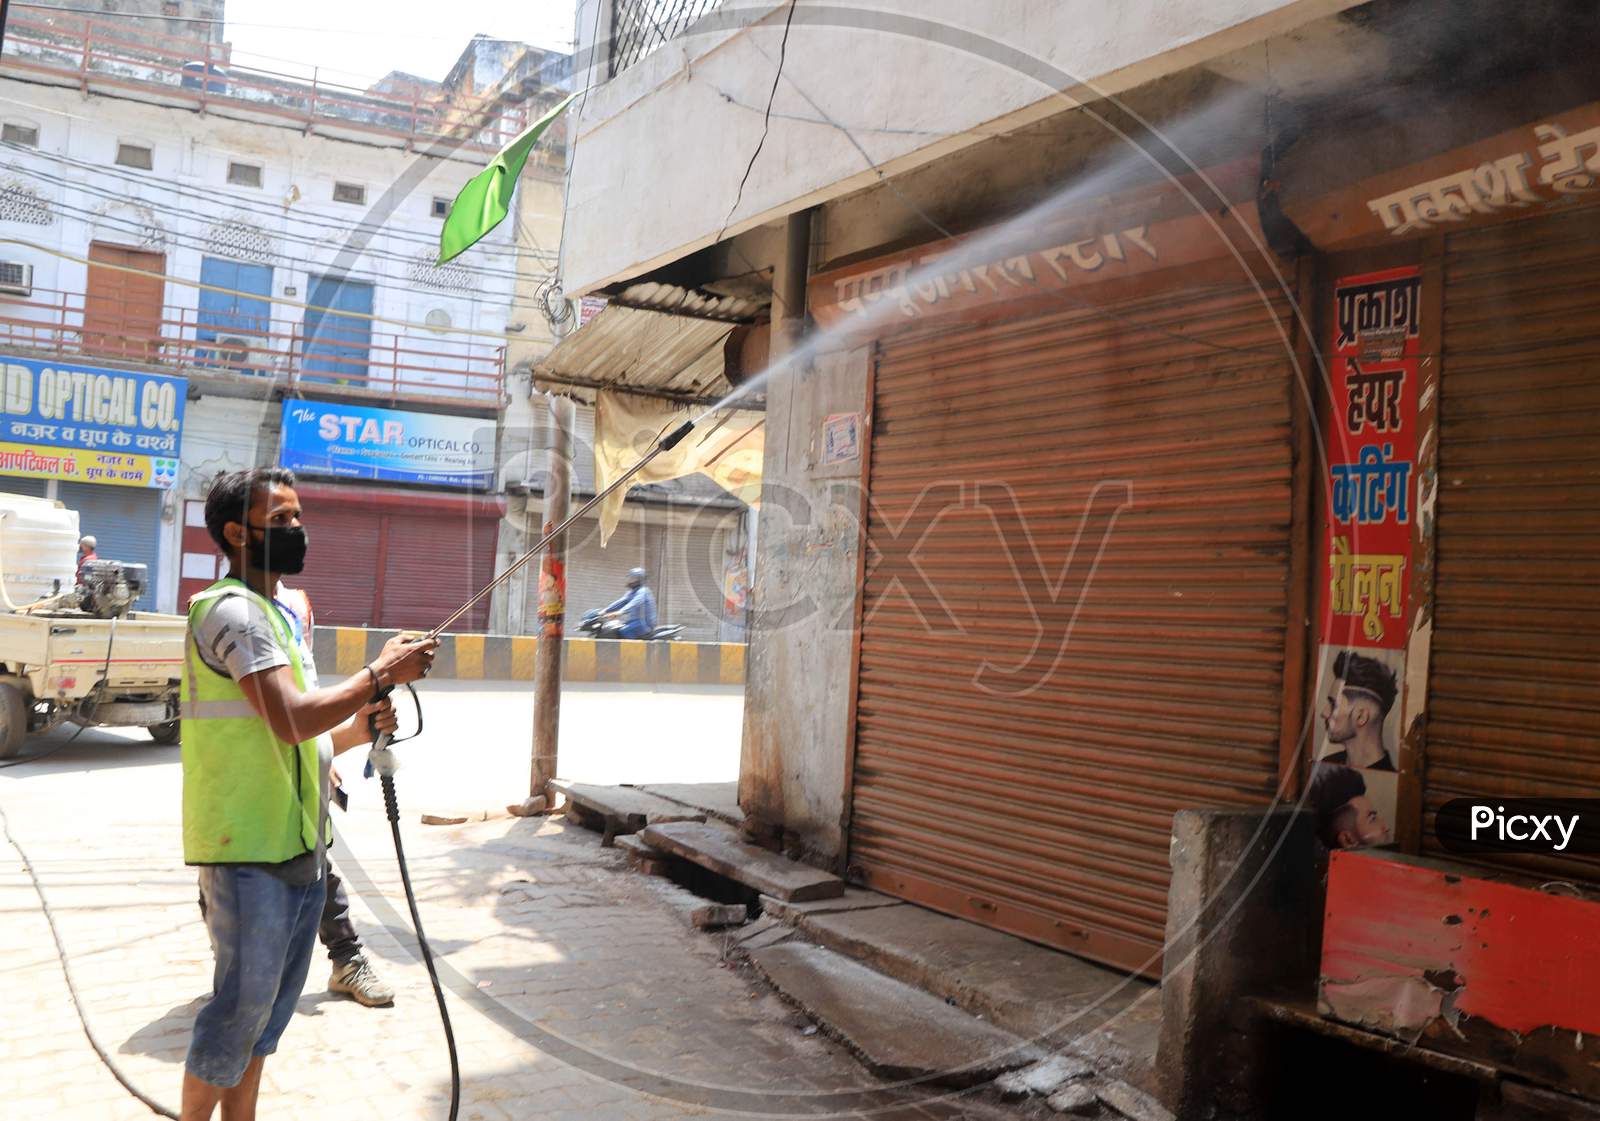 Municipal Workers Sanitize Old City Market During A Nationwide Lock down To Slow The Spreading Of The Corona virus Disease (Covid-19), In Prayagraj, April, 15, 2020.